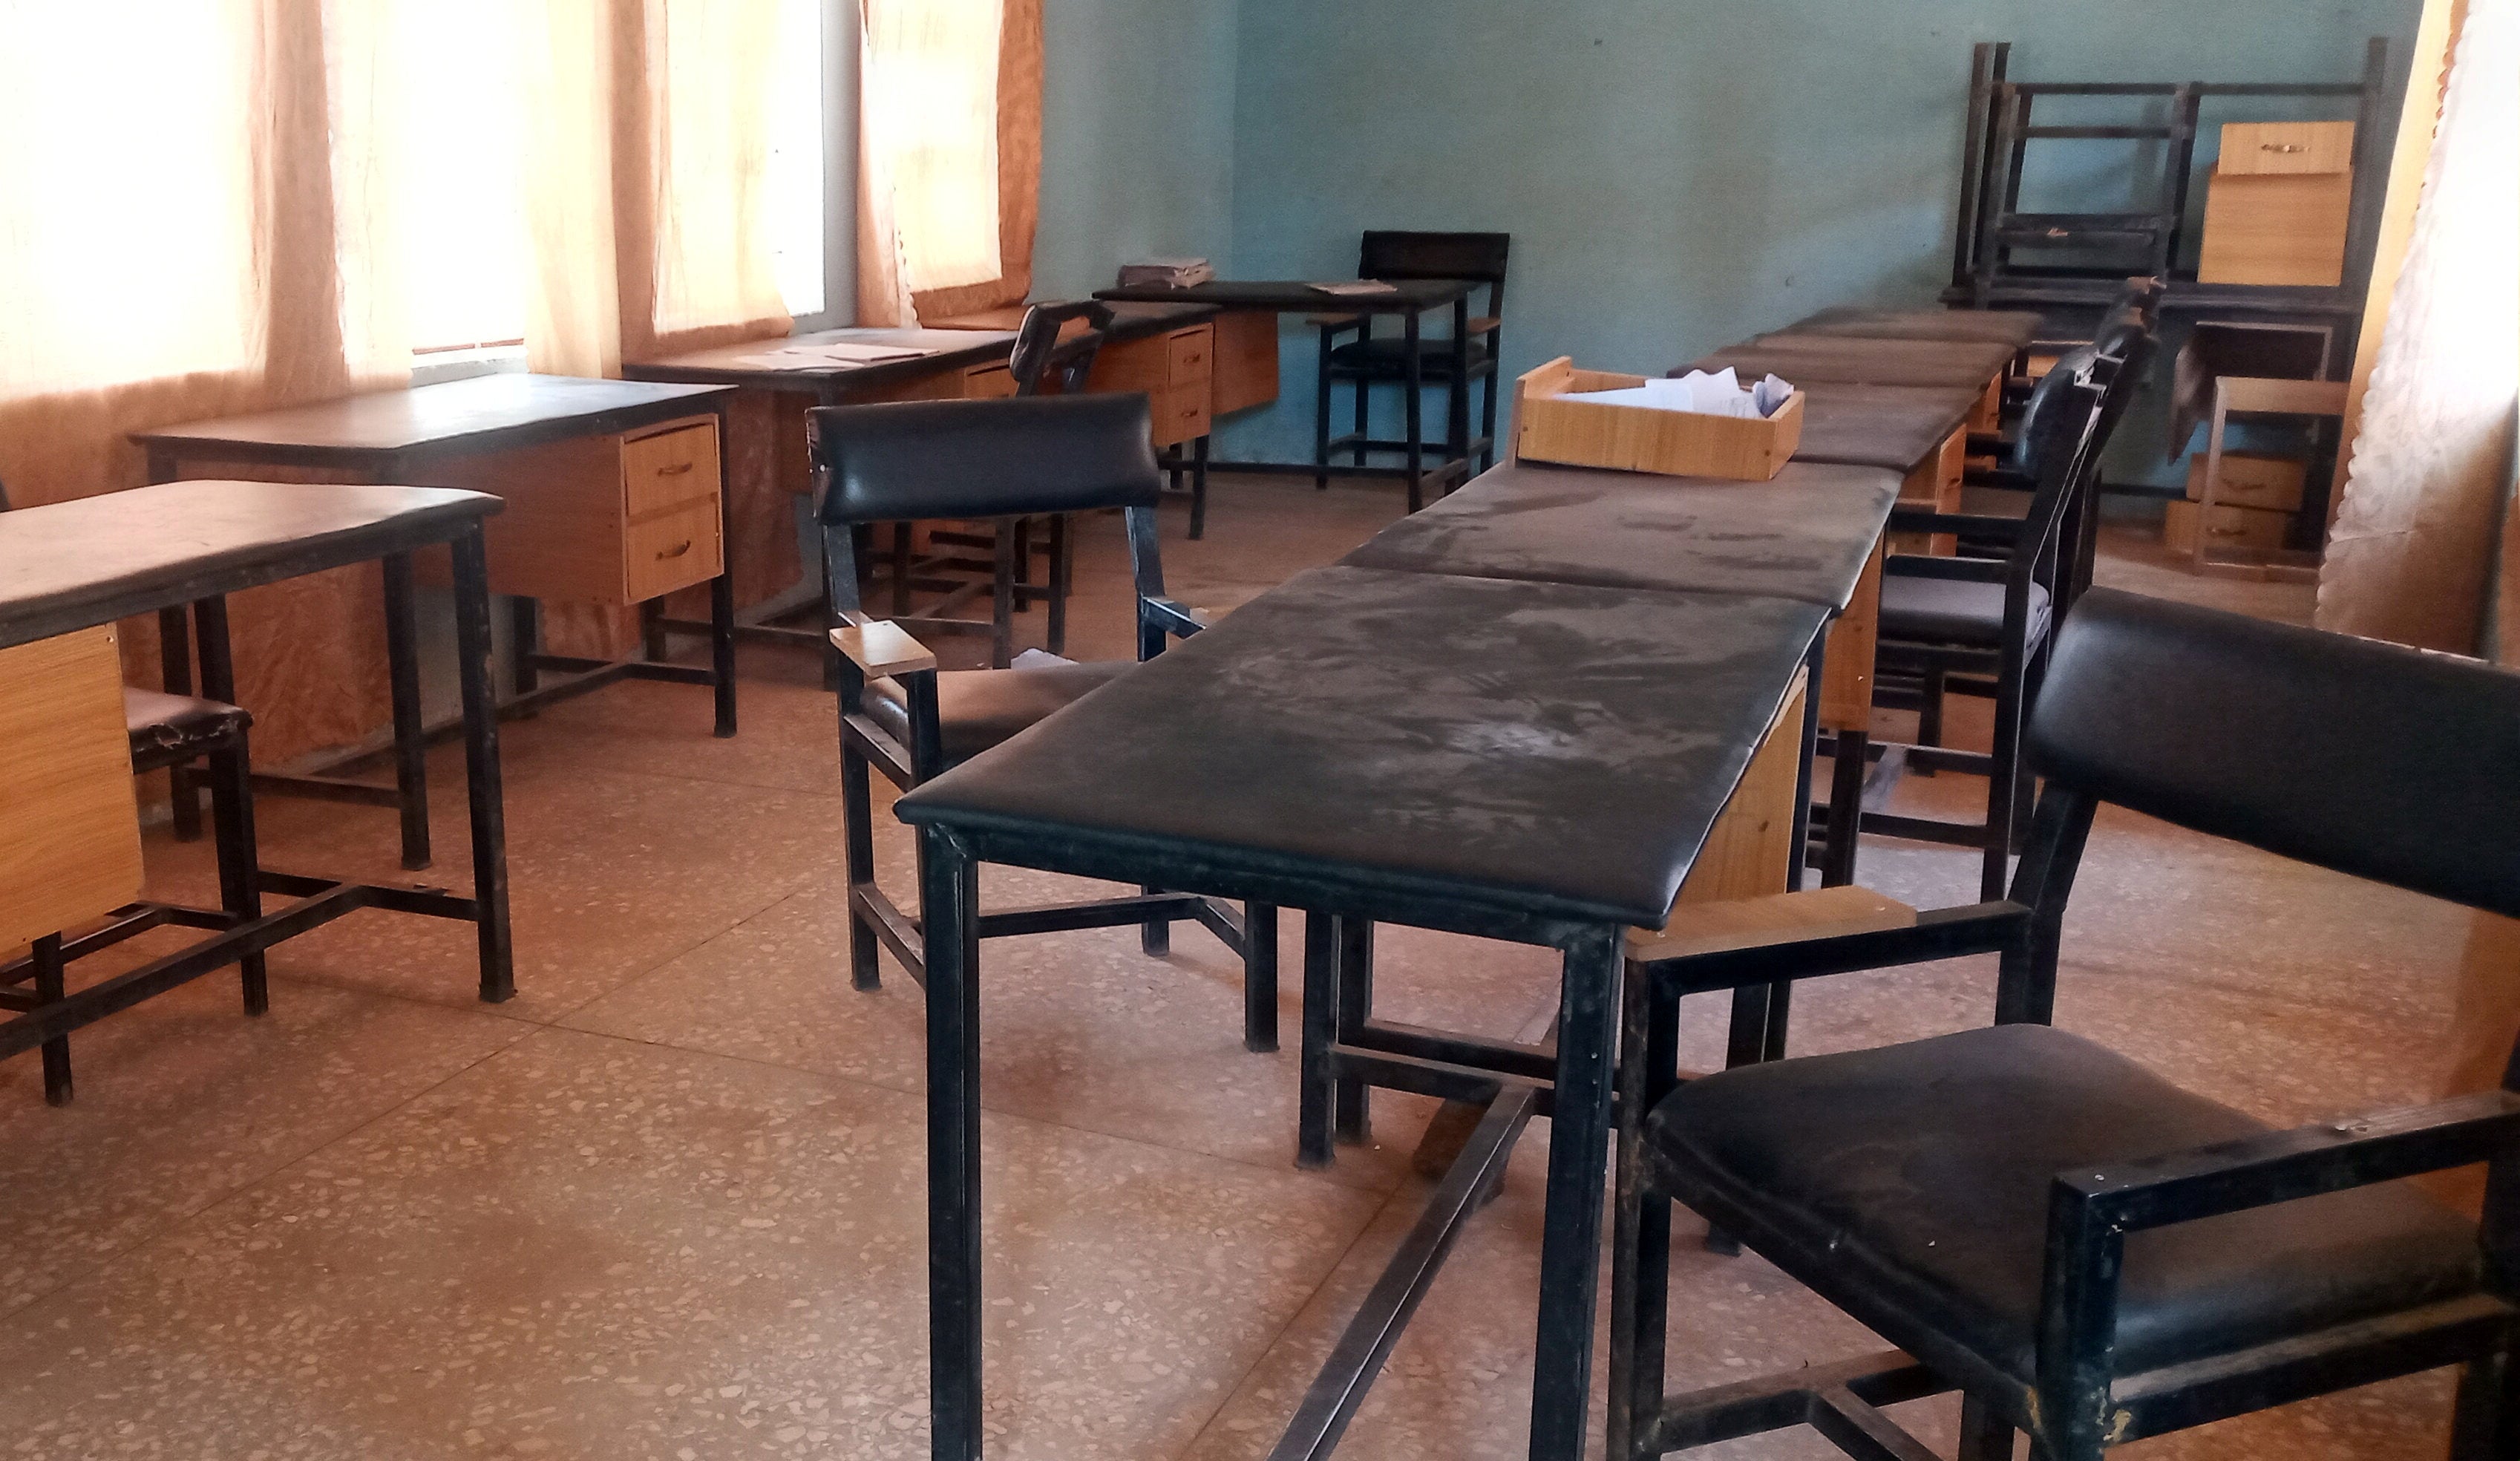 A view of a classroom at the Government Science Secondary School in Kankara district, after it was attacked by armed bandits